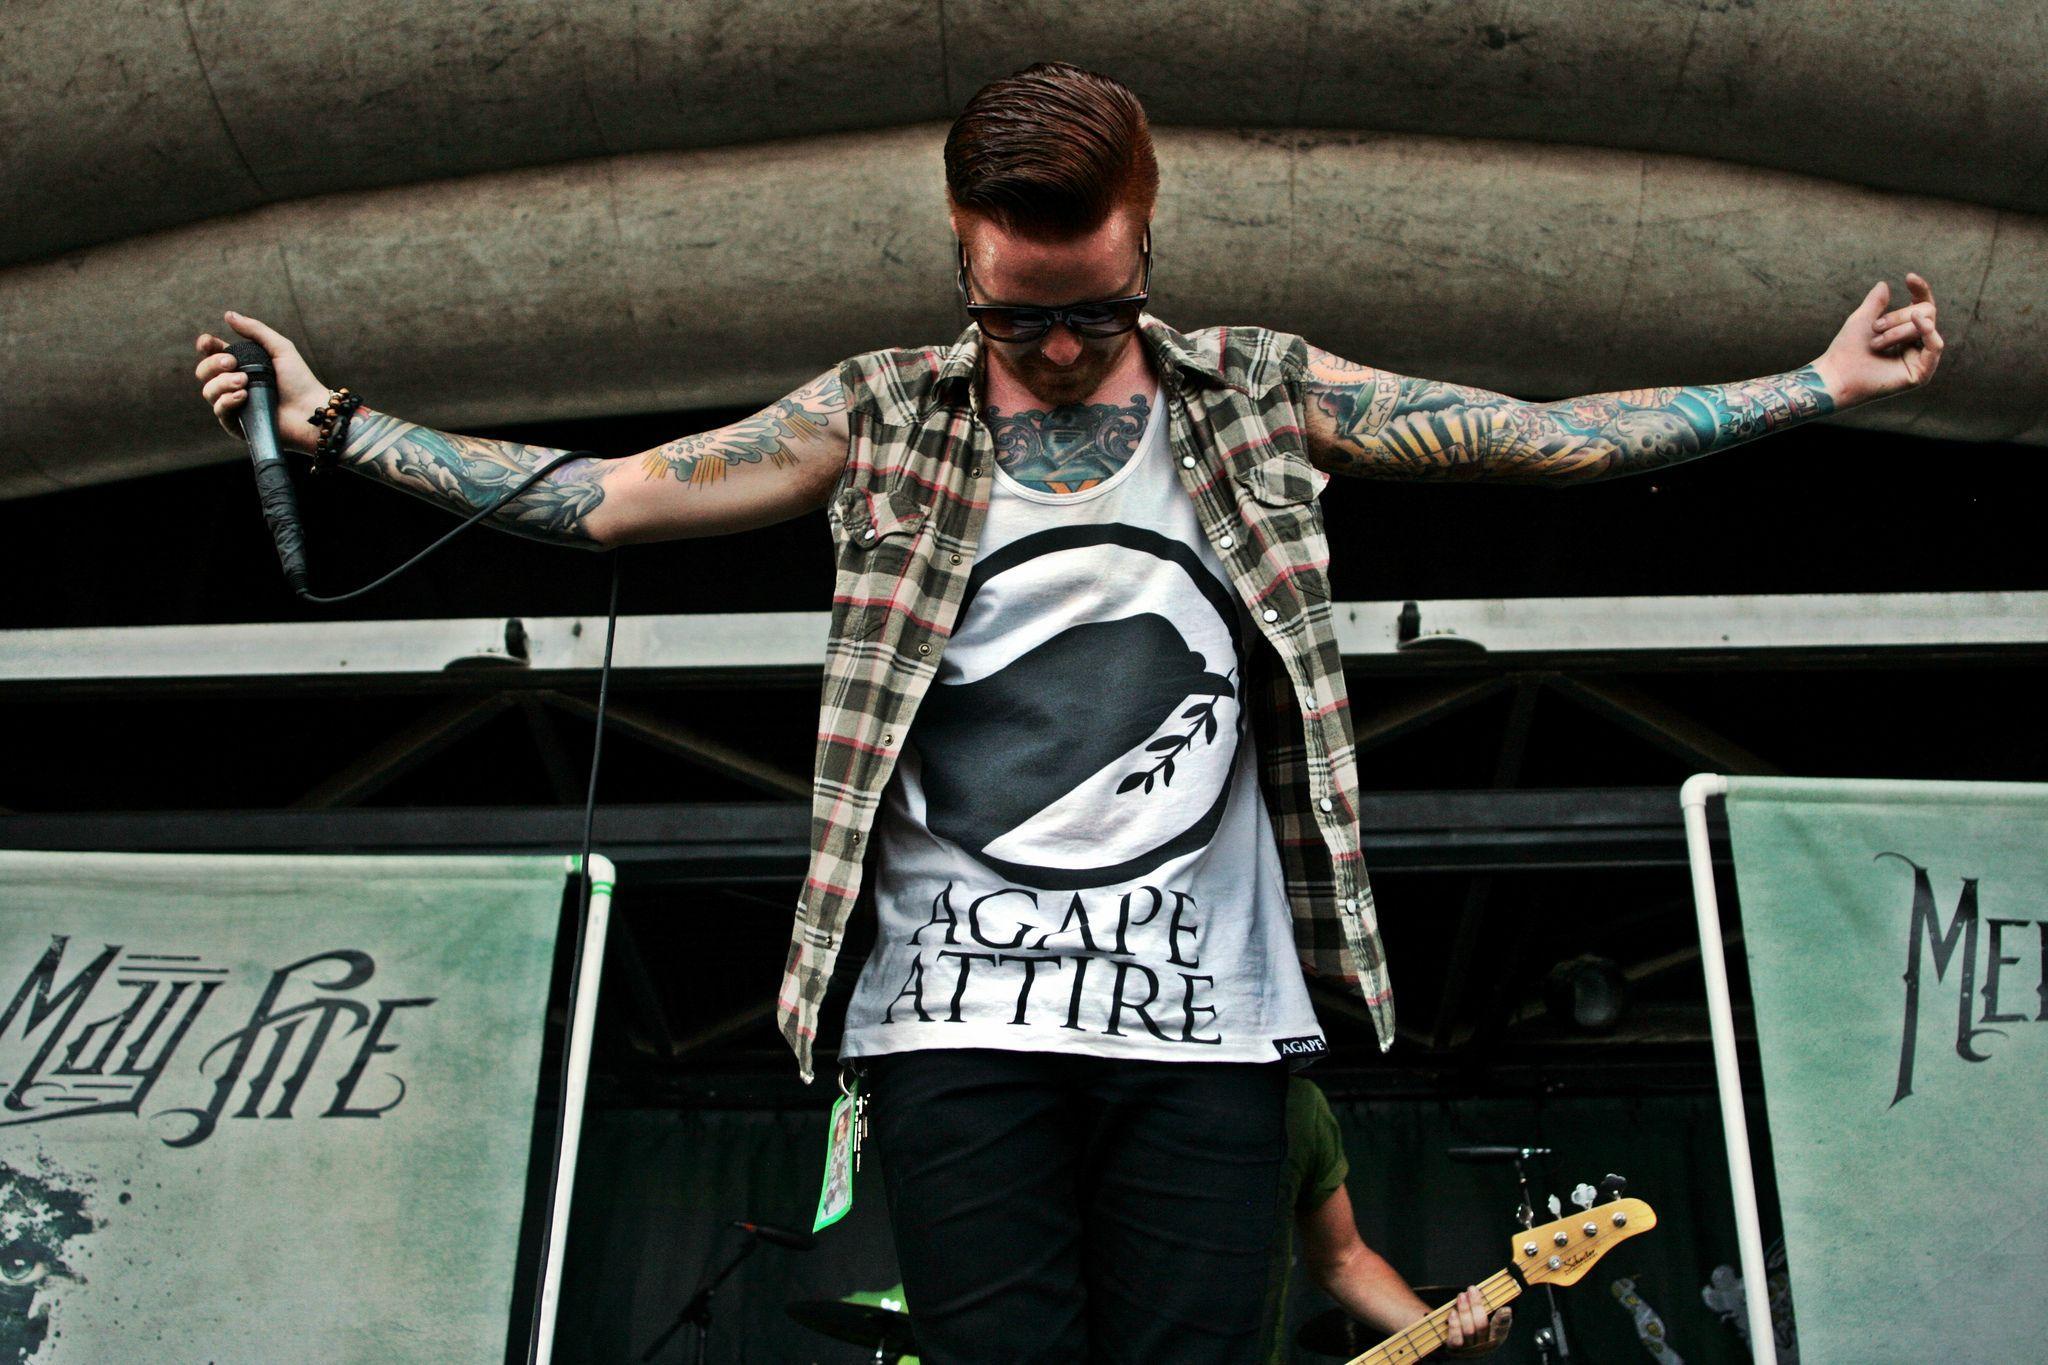 For those of you who might be Memphis May Fire fans, here's one